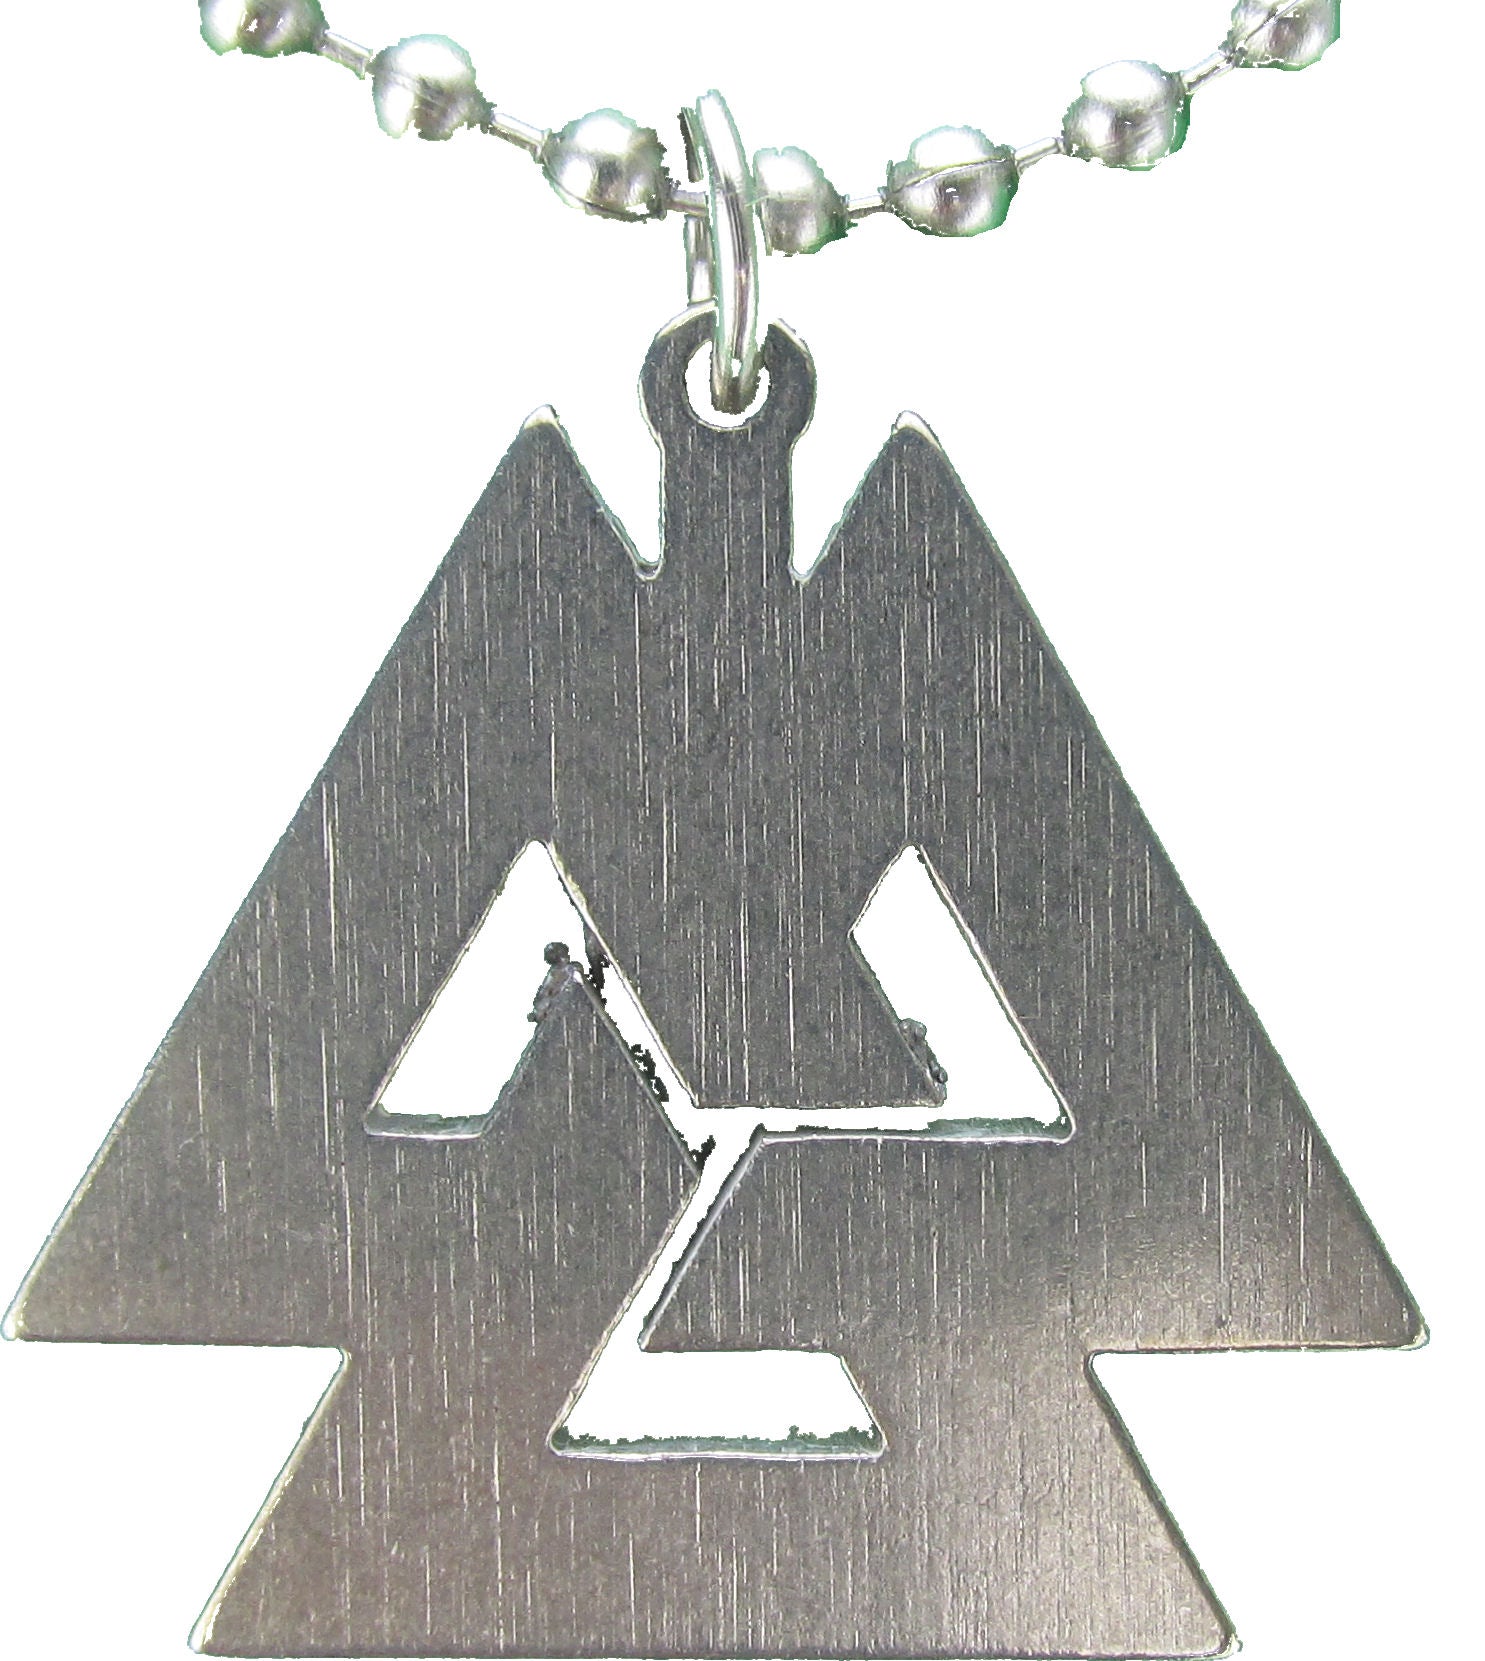 Genuine U.S. Military Issue Asatru Necklace with Dog Tag Chain